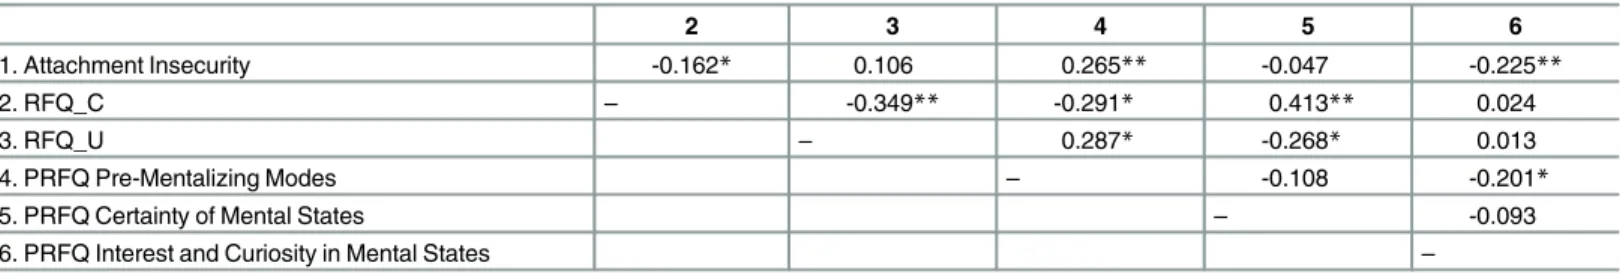 Table 10 shows that the RFQ_C, but not the RFQ_U, subscale was correlated with infant attachment insecurity